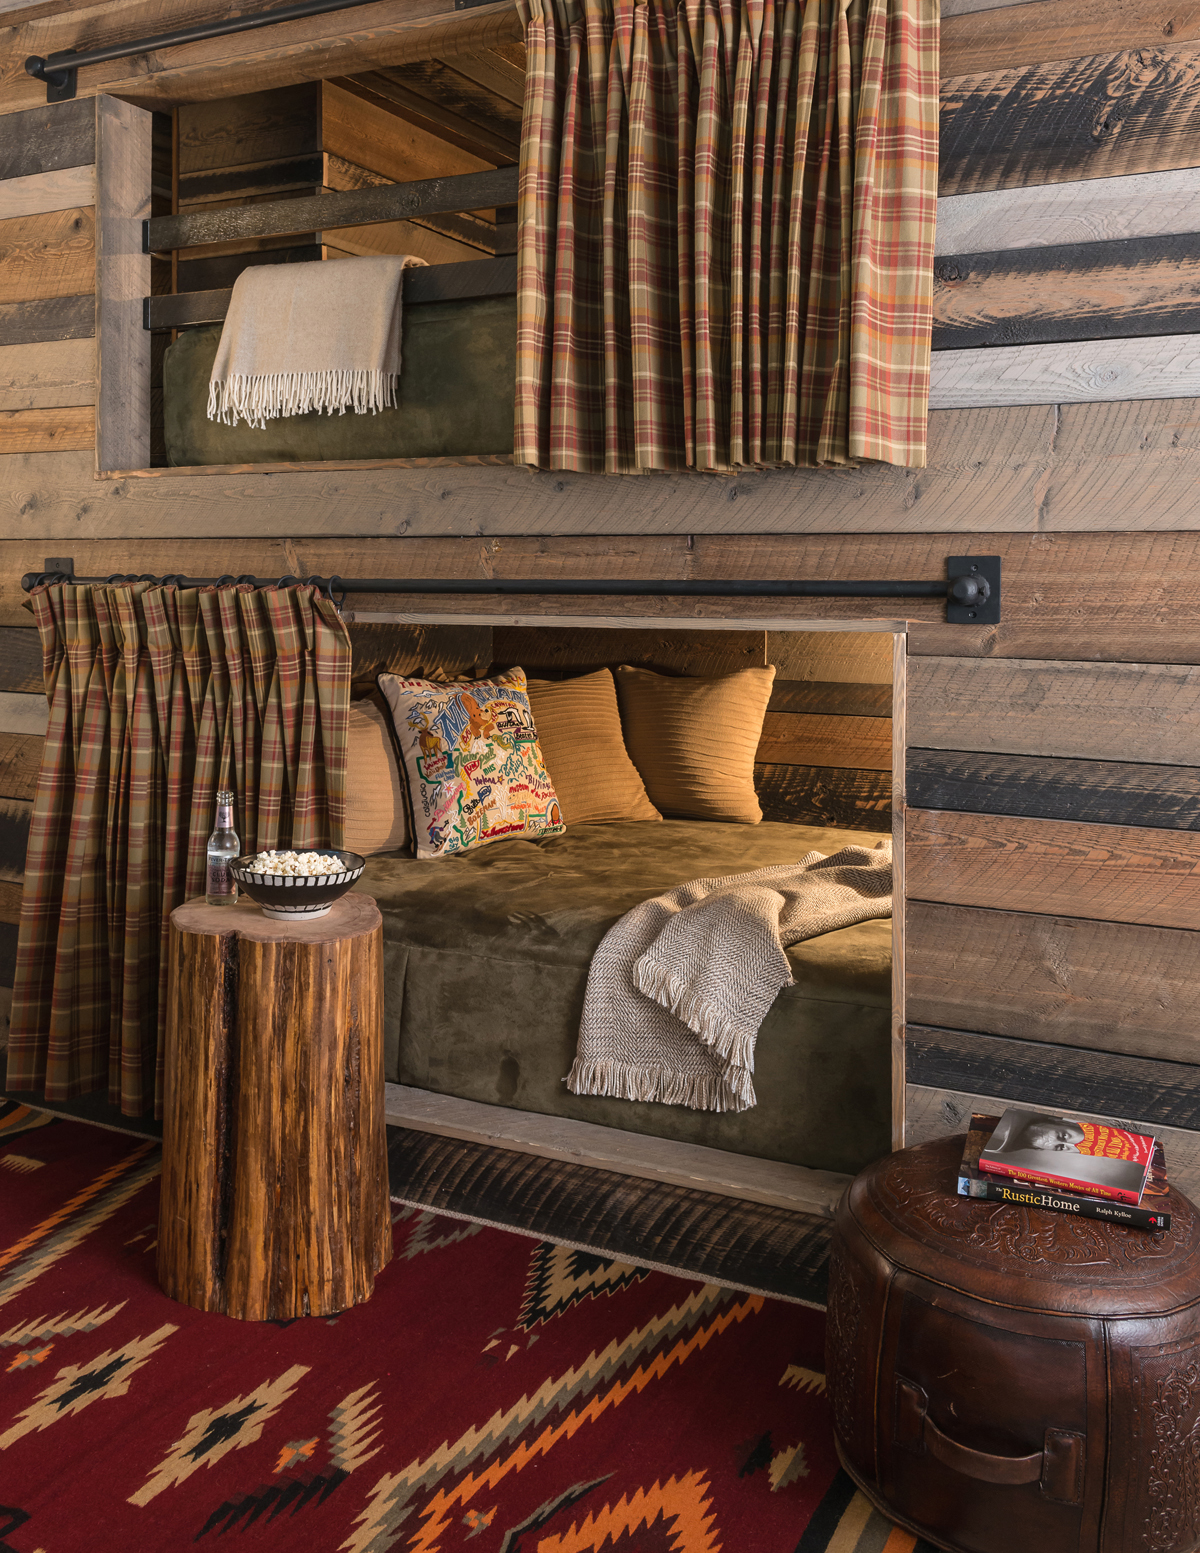 A Kibler & Kirch remodel of a family’s lakeside lodge pays homage to the bunk concept – and is informed by the natural materials and motifs that define camp-style appeal (photo by Audrey Hall).